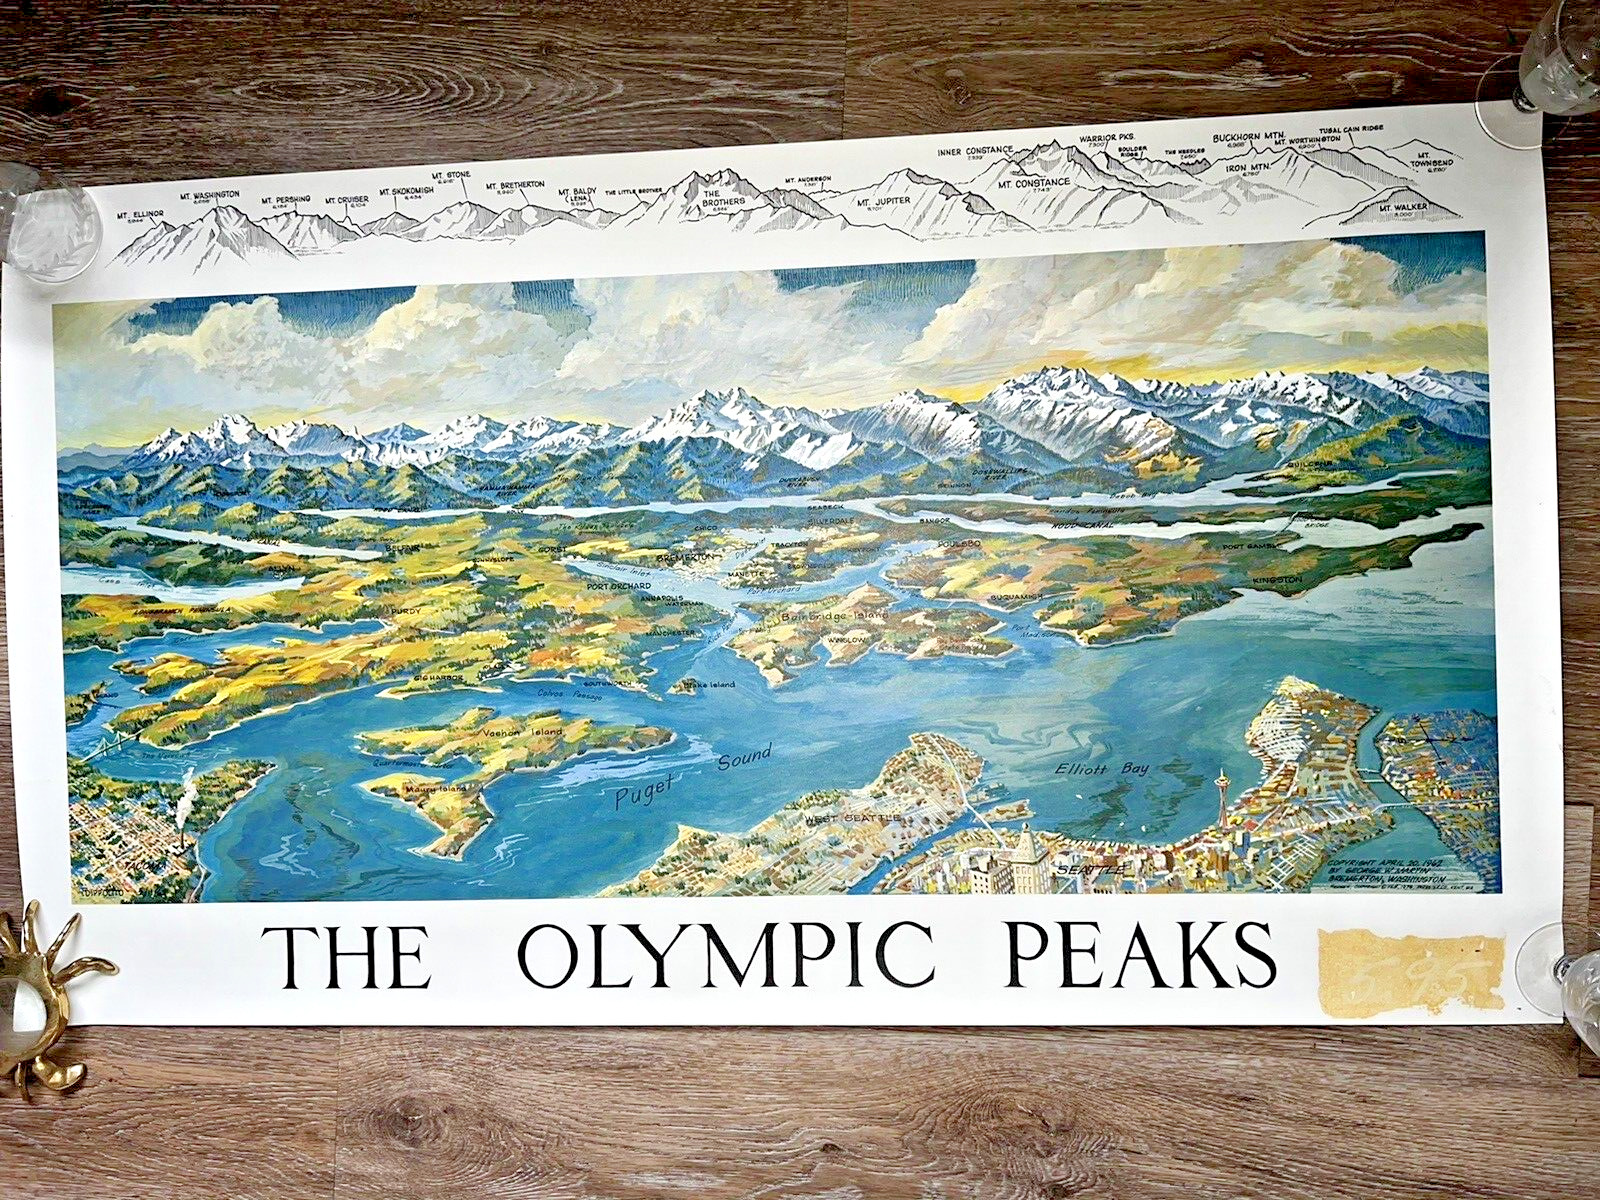 Vintage Olympic Peaks Puget Sound 2 Sided Map George W. Martin 1962/78 WA